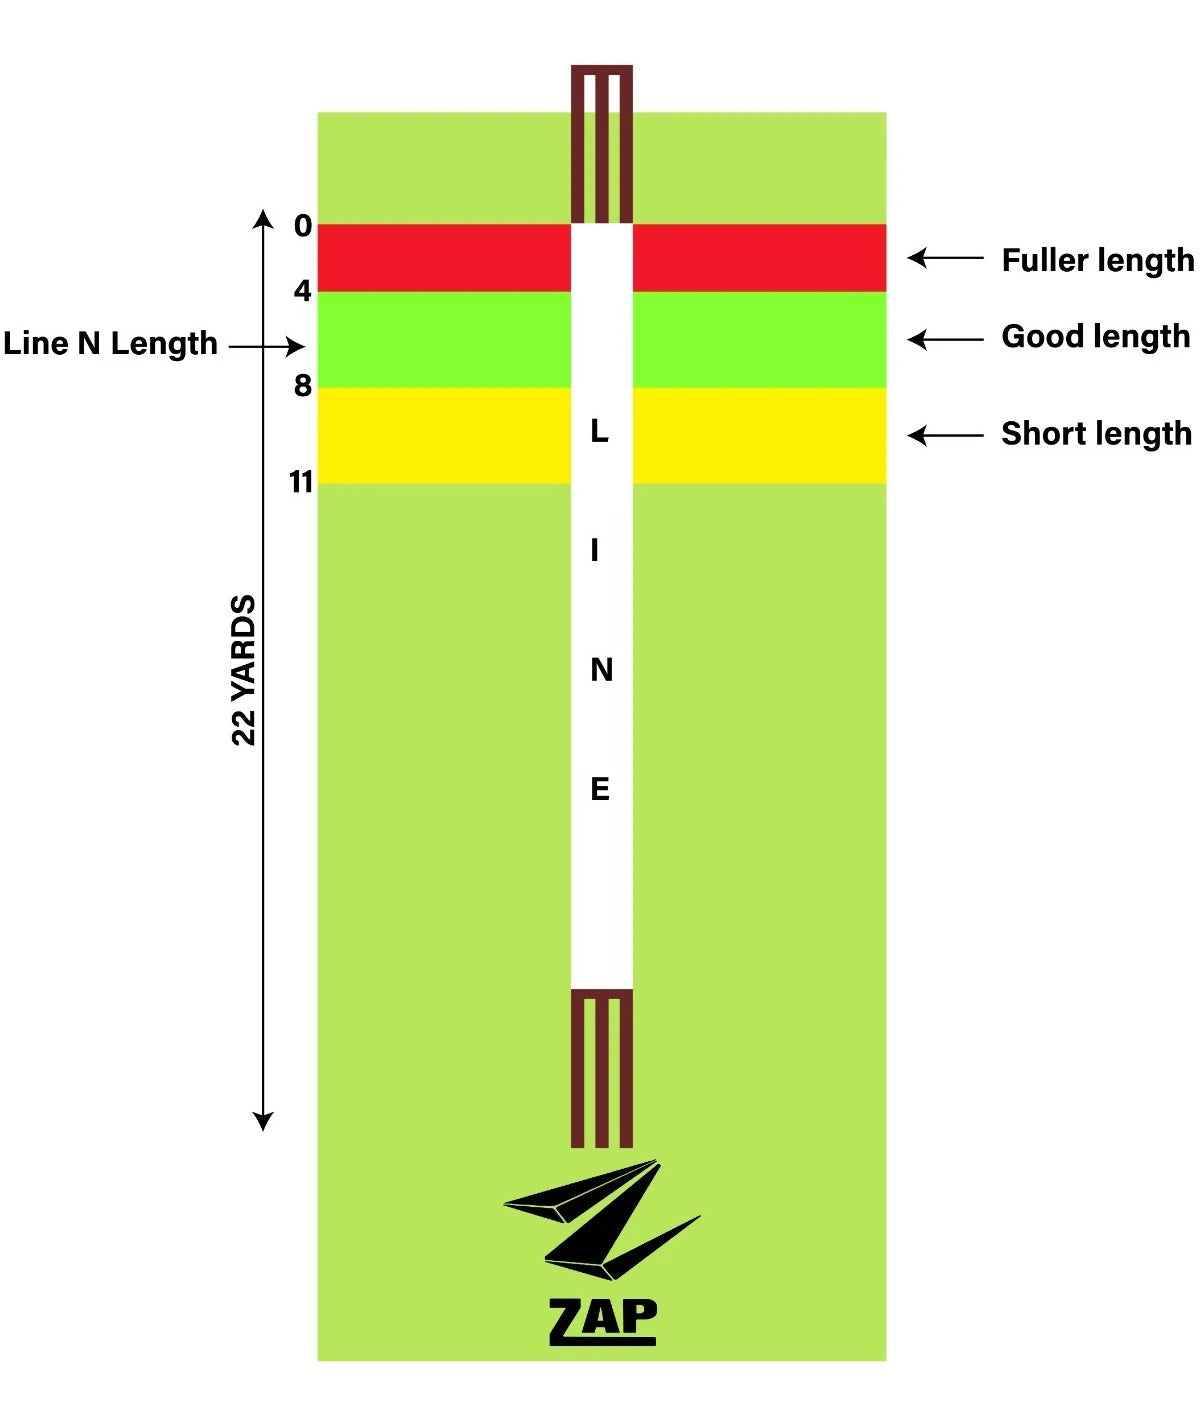 The line and lengths on the cricket pitch